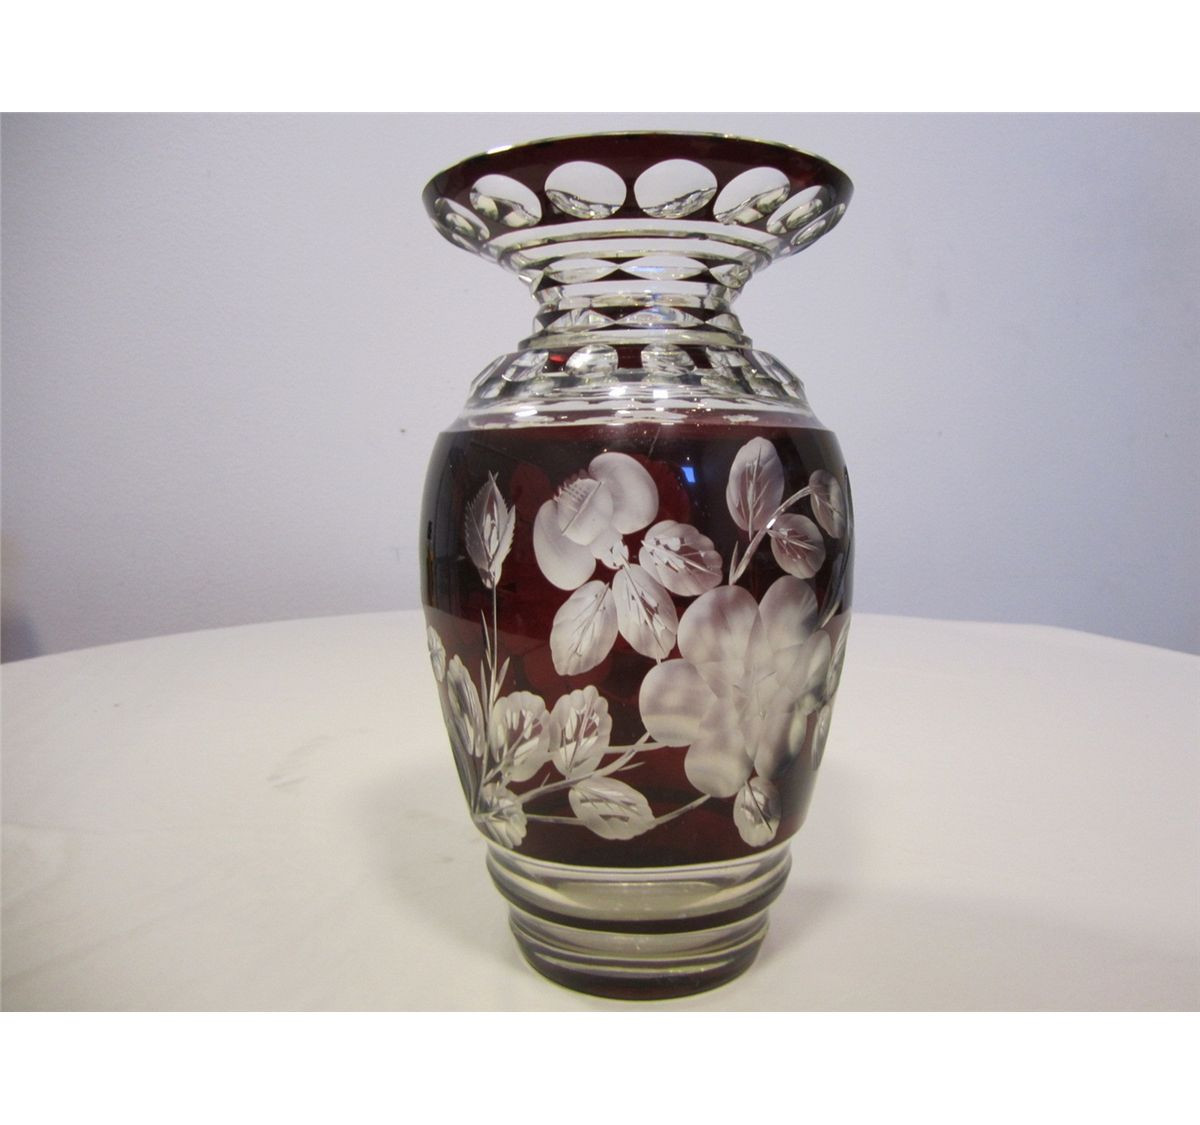 27 attractive Bohemia Crystal Vase Price 2024 free download bohemia crystal vase price of antique bohemian czech deep ruby red cut to clear crystal vase 11 1 for image 2 antique bohemian czech deep ruby red cut to clear crystal vase 11 1